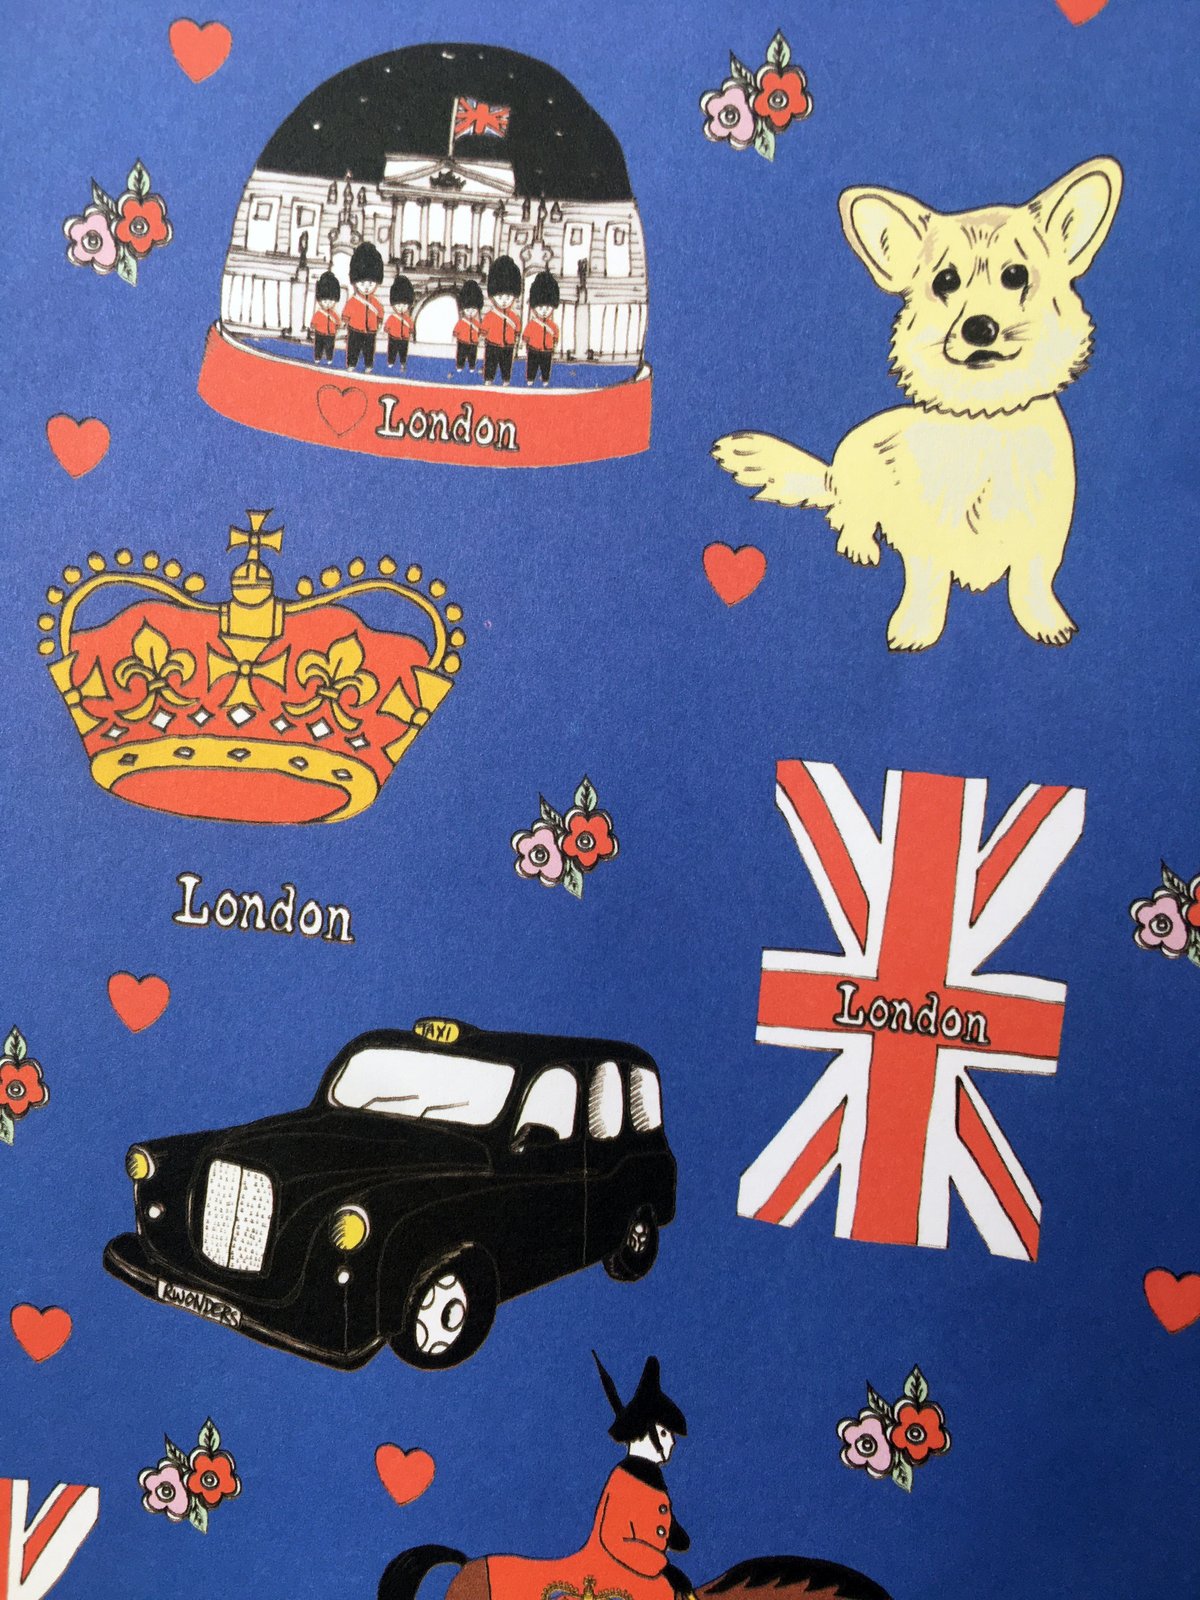 London Platinum Jubilee Wrapping Paper